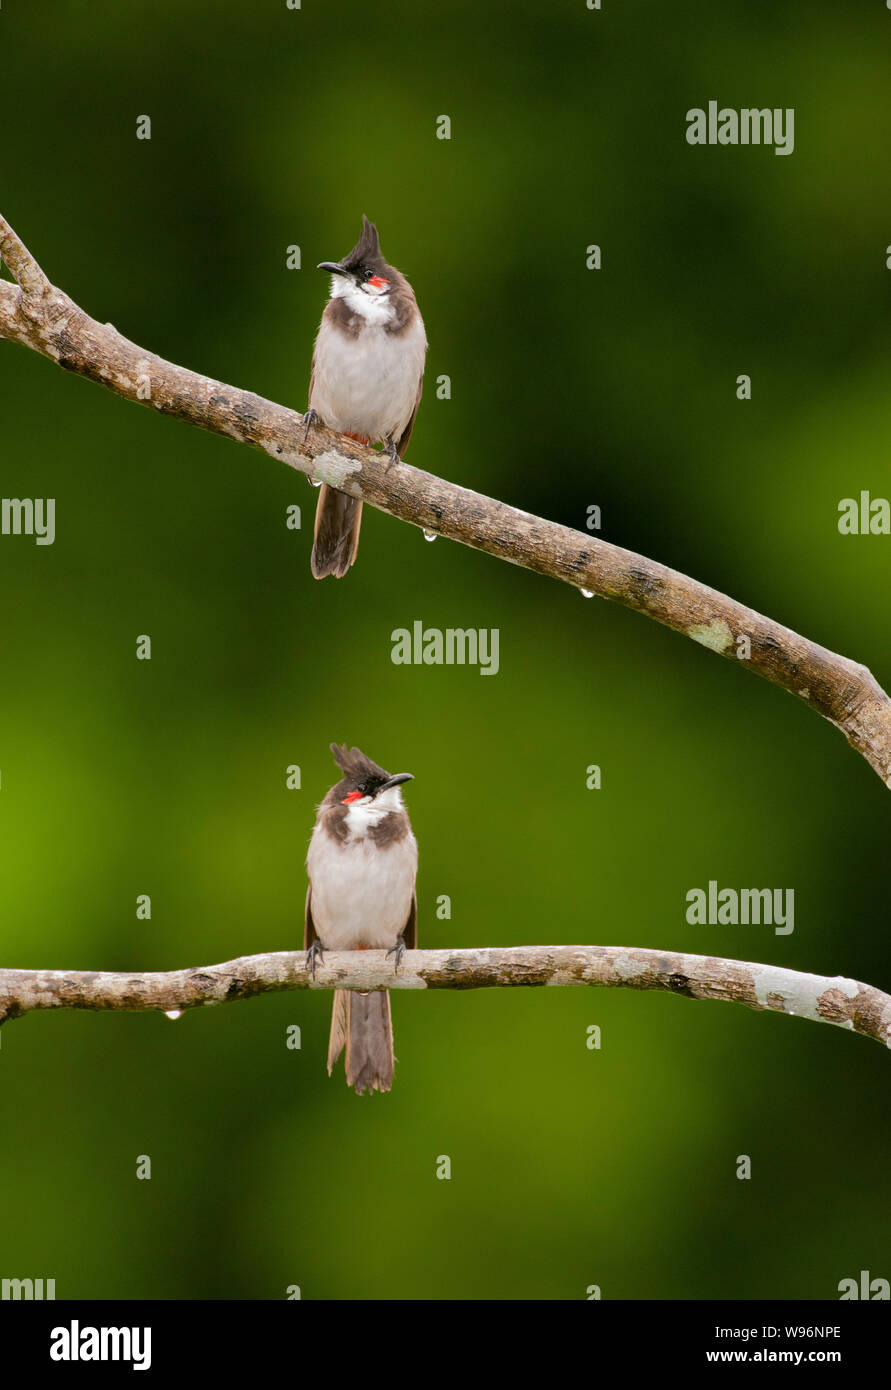 Two Red-whiskered bulbul, Pycnonotus jocosus, also known as Crested bulbul, perched on branch, Thattekad Bird Sanctuary, Kerala, Western Ghats, India Stock Photo